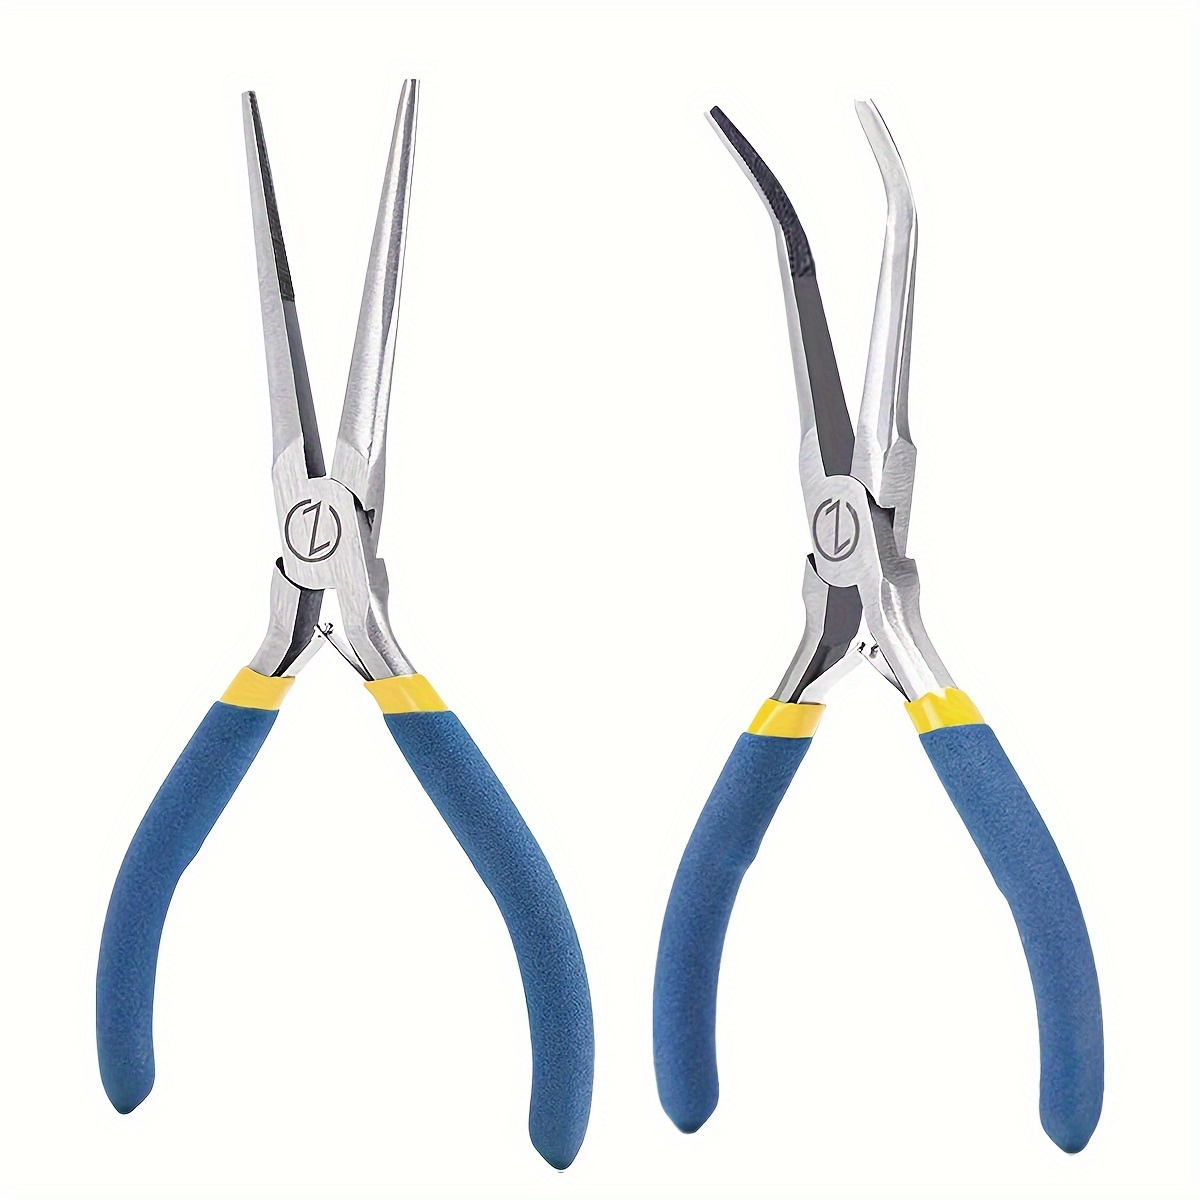 

2pcs Mini Needle Nose Pliers Set, 5.7in Serrated Straight/bent Nose Pliers For Jewelry Making, Wires Wrapping, And Small Object Gripping